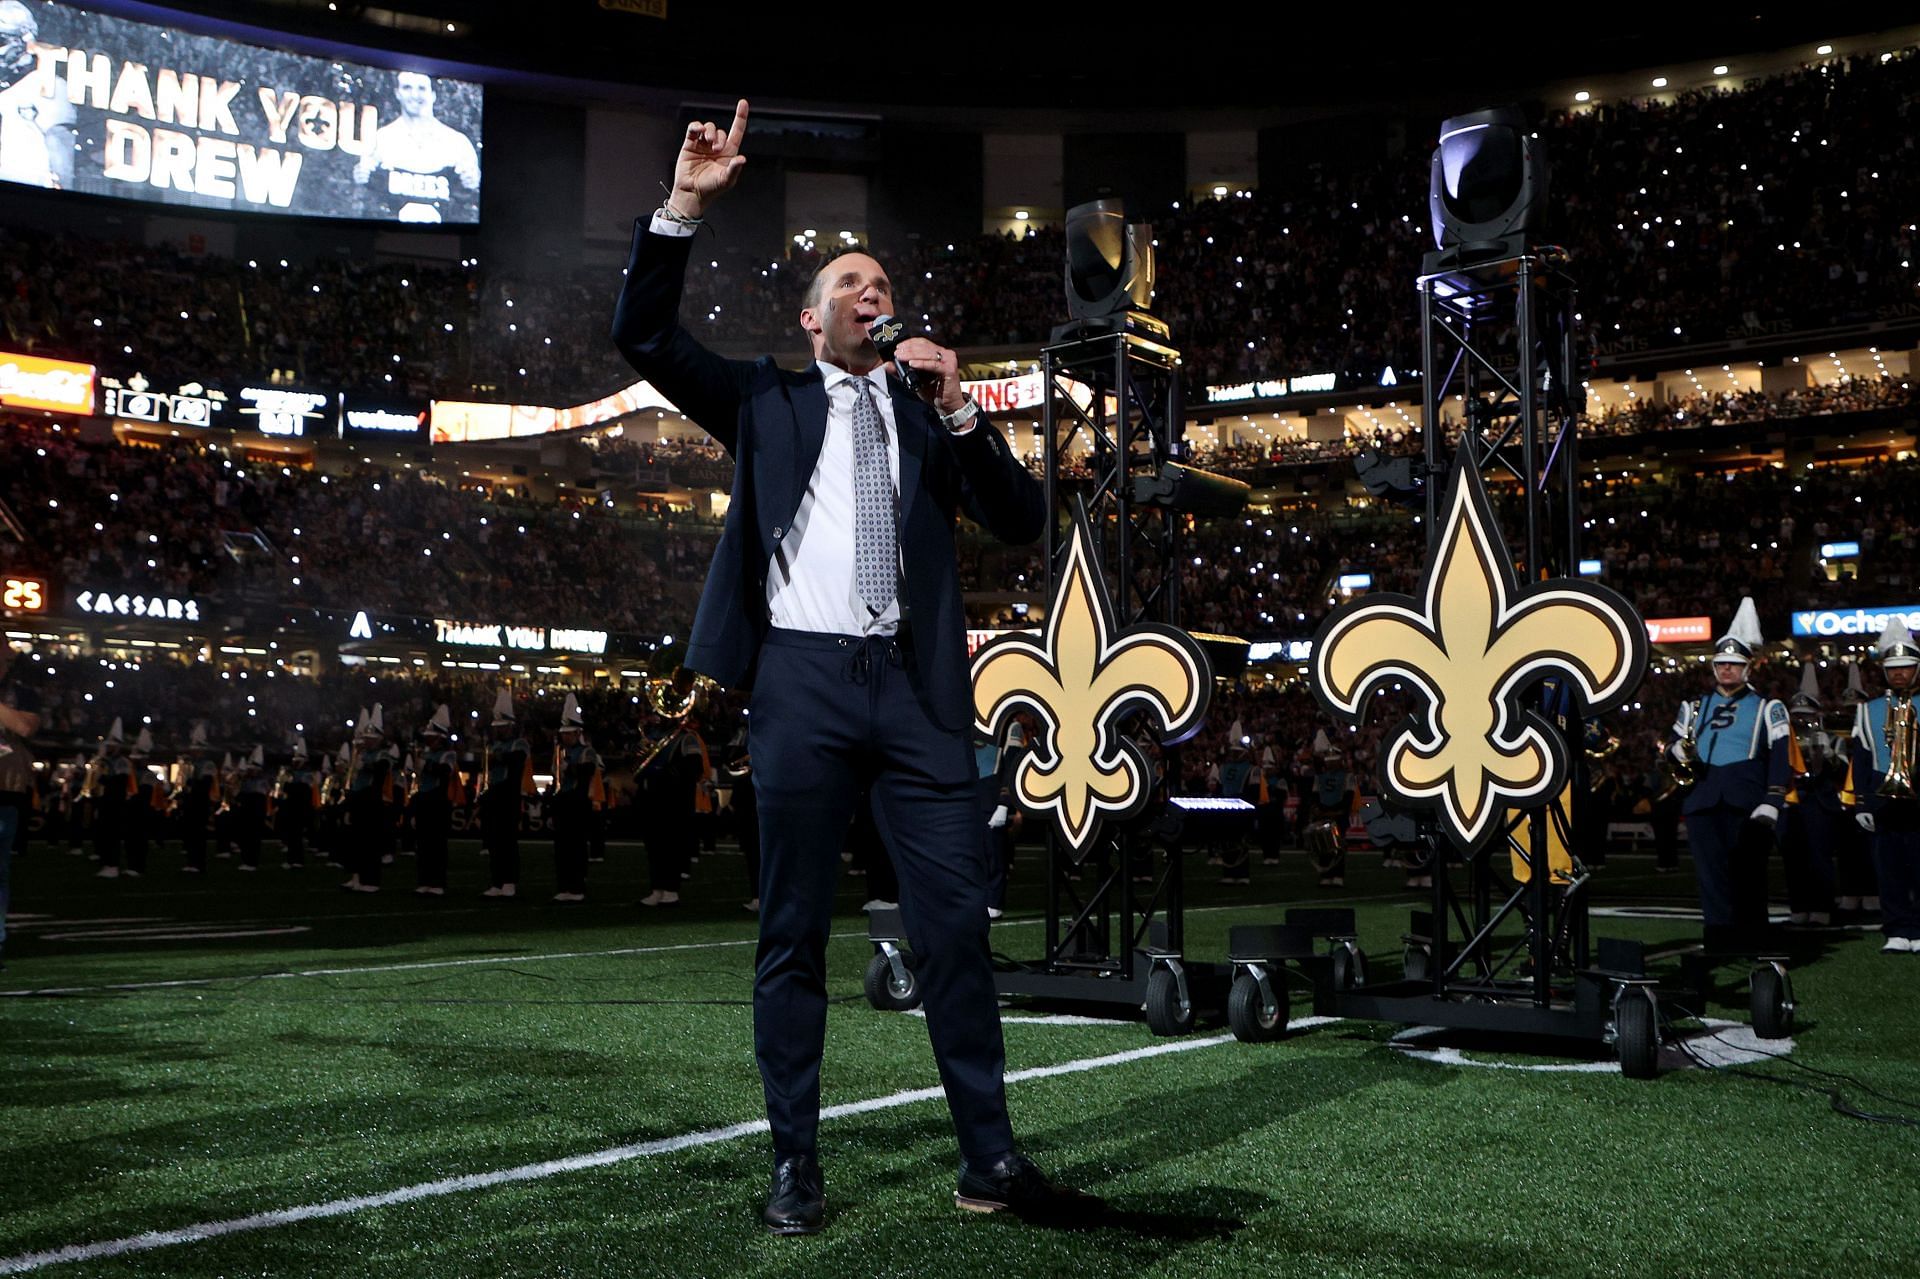 &quot;Thank you Drew&quot;: Moments from the tribute to Drew Brees at Caesar&#039;s Superdome